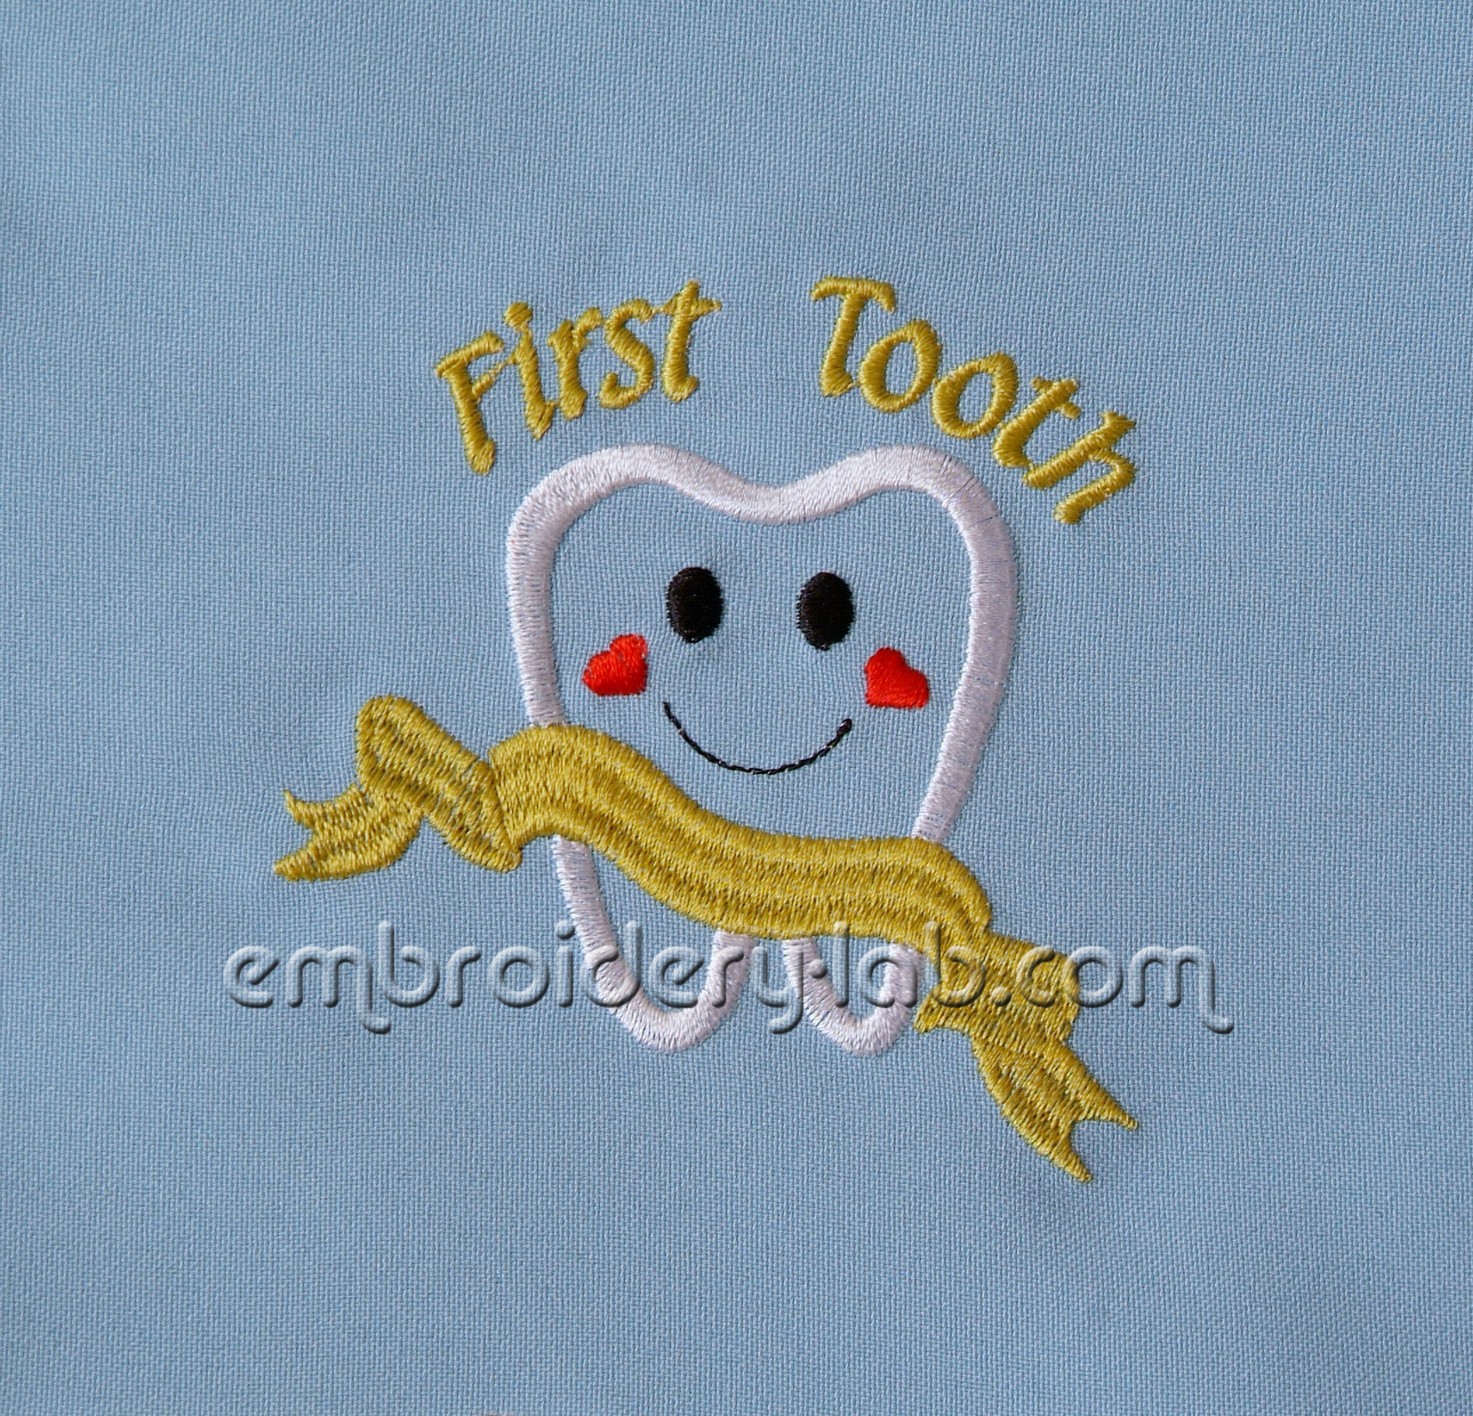 First tooth 0001